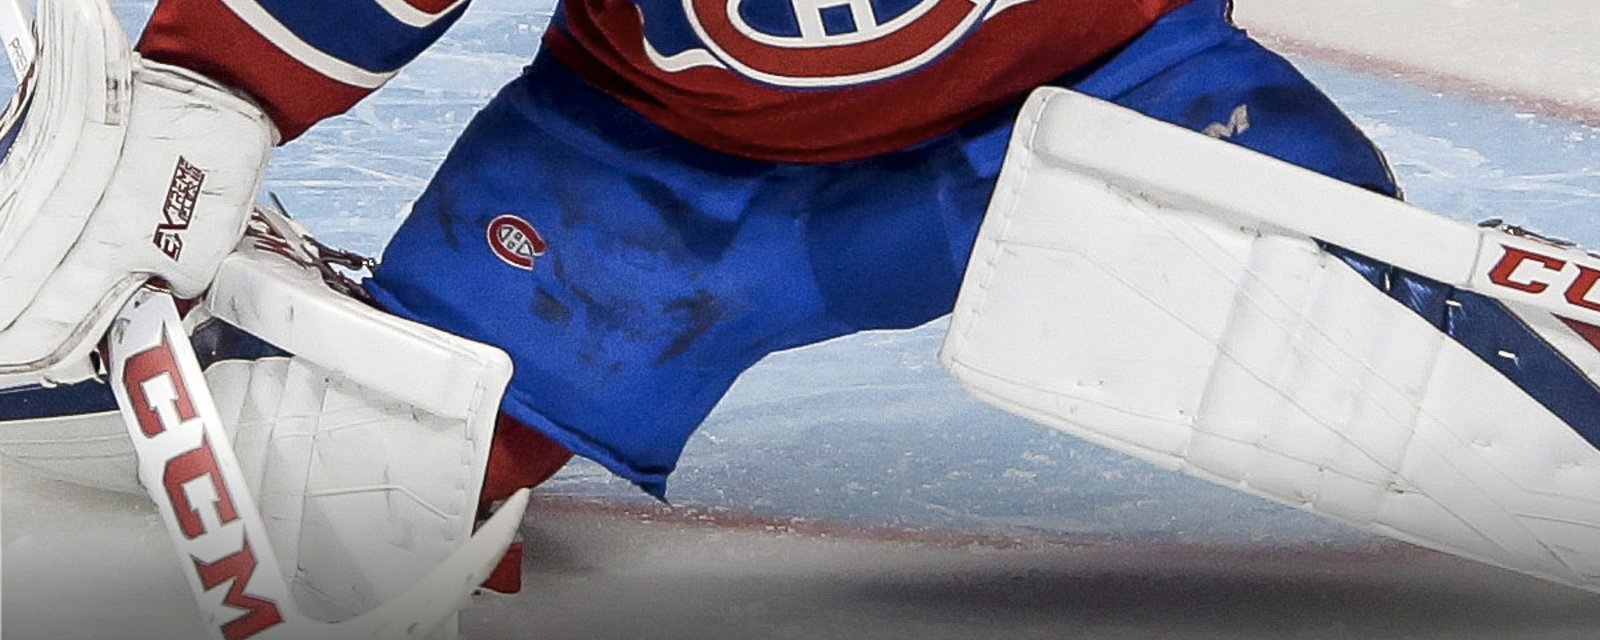 Breaking: Another Habs goalie out due to injury!